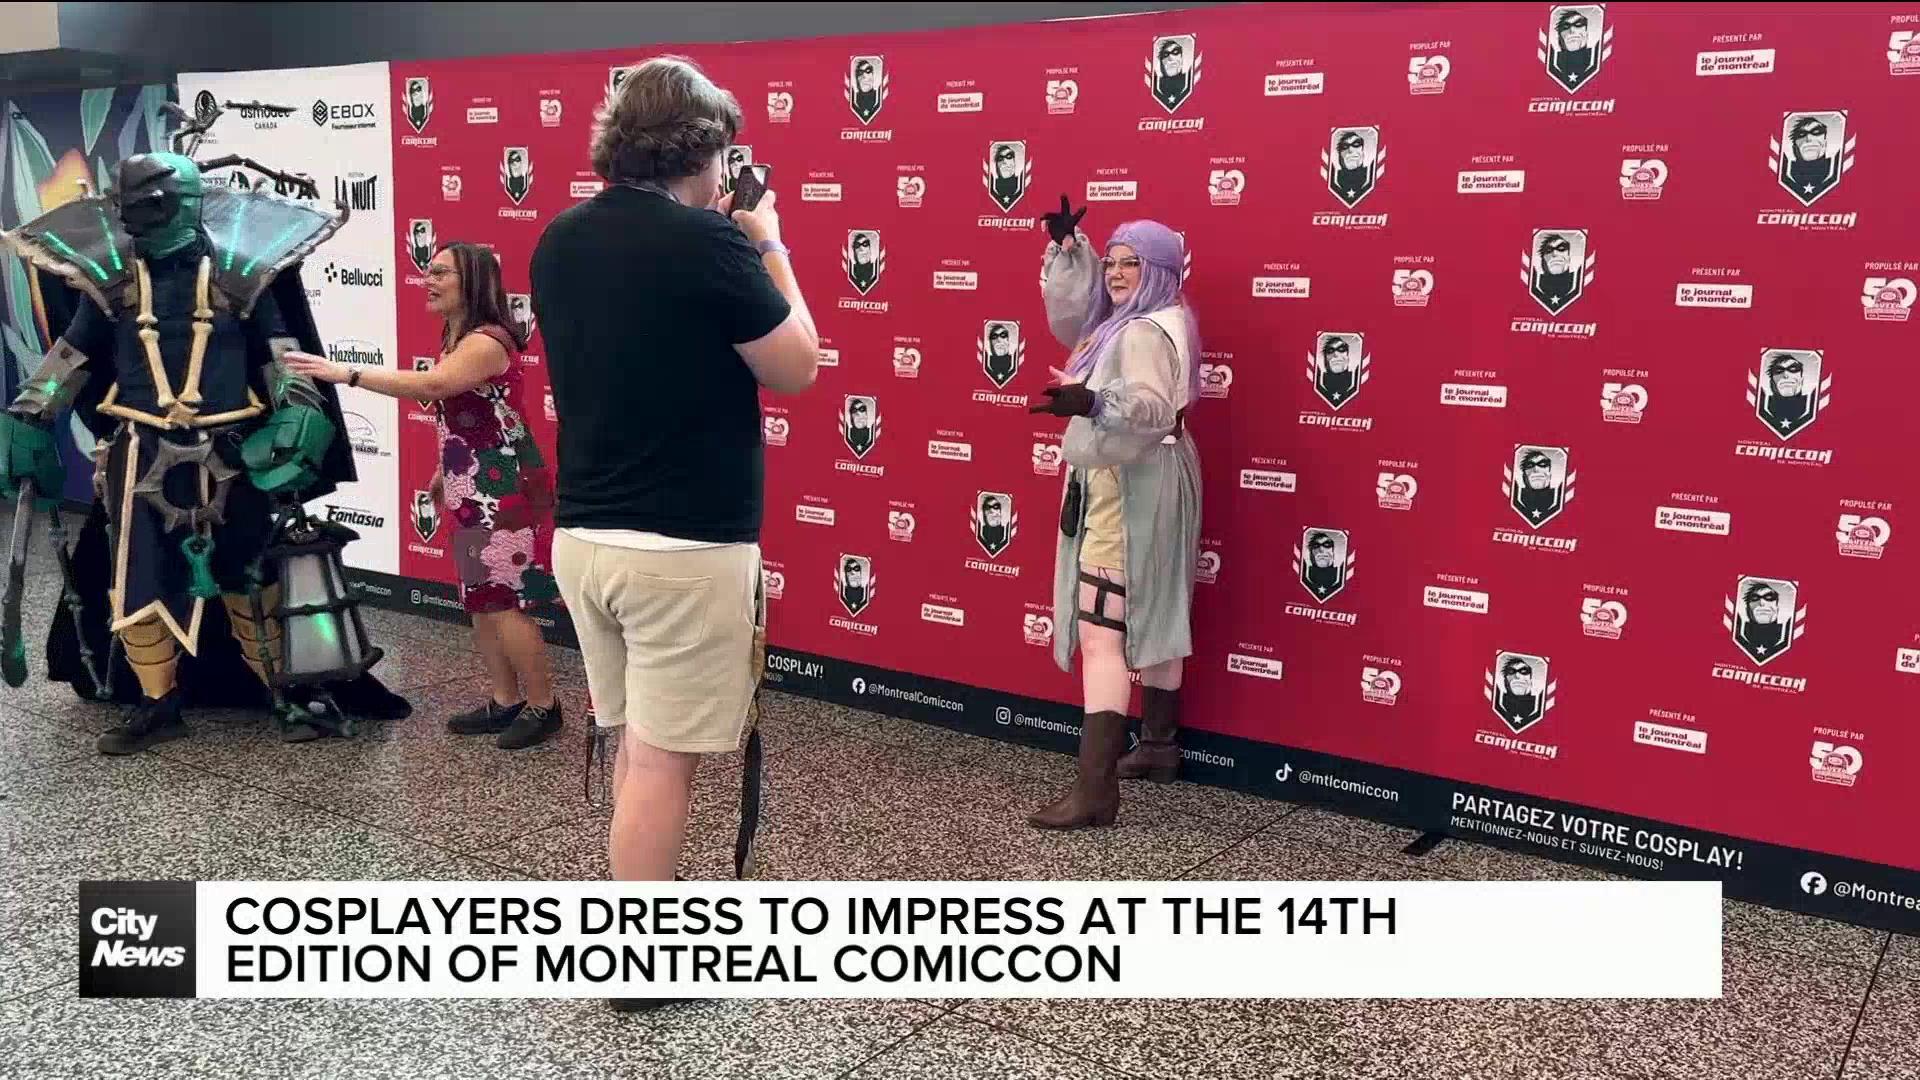 Cosplayers showcase their creativity at Montreal Comiccon